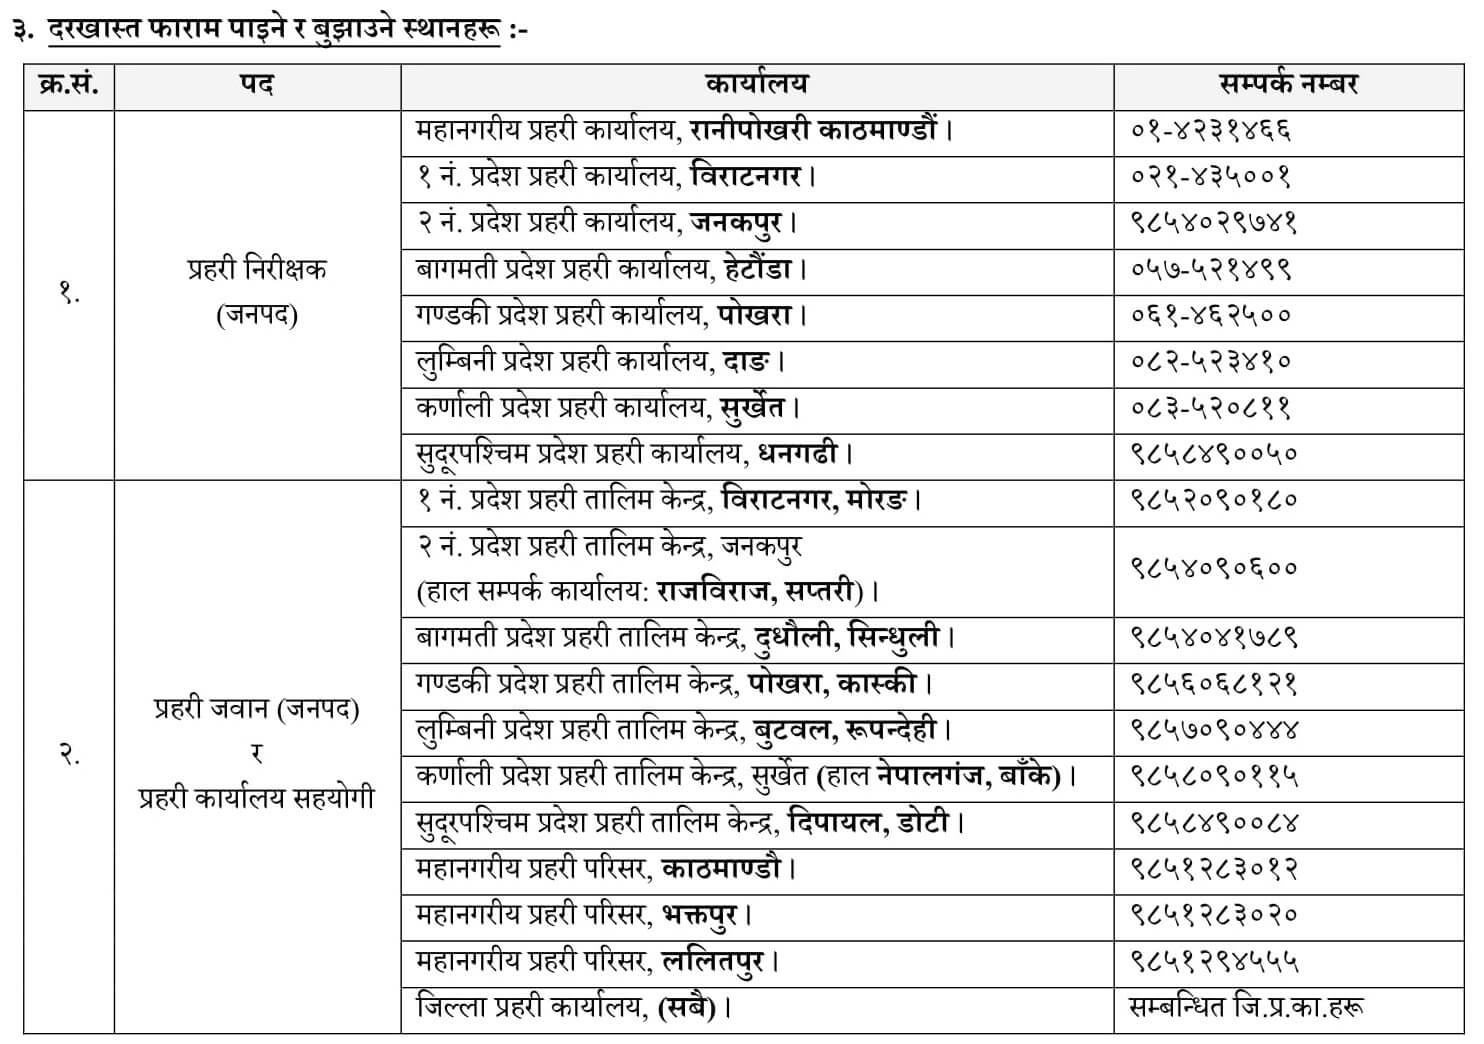 Nepal Police Vacancy for Police Inspector, Police Constable (Jawan) and Police Office Assistant.